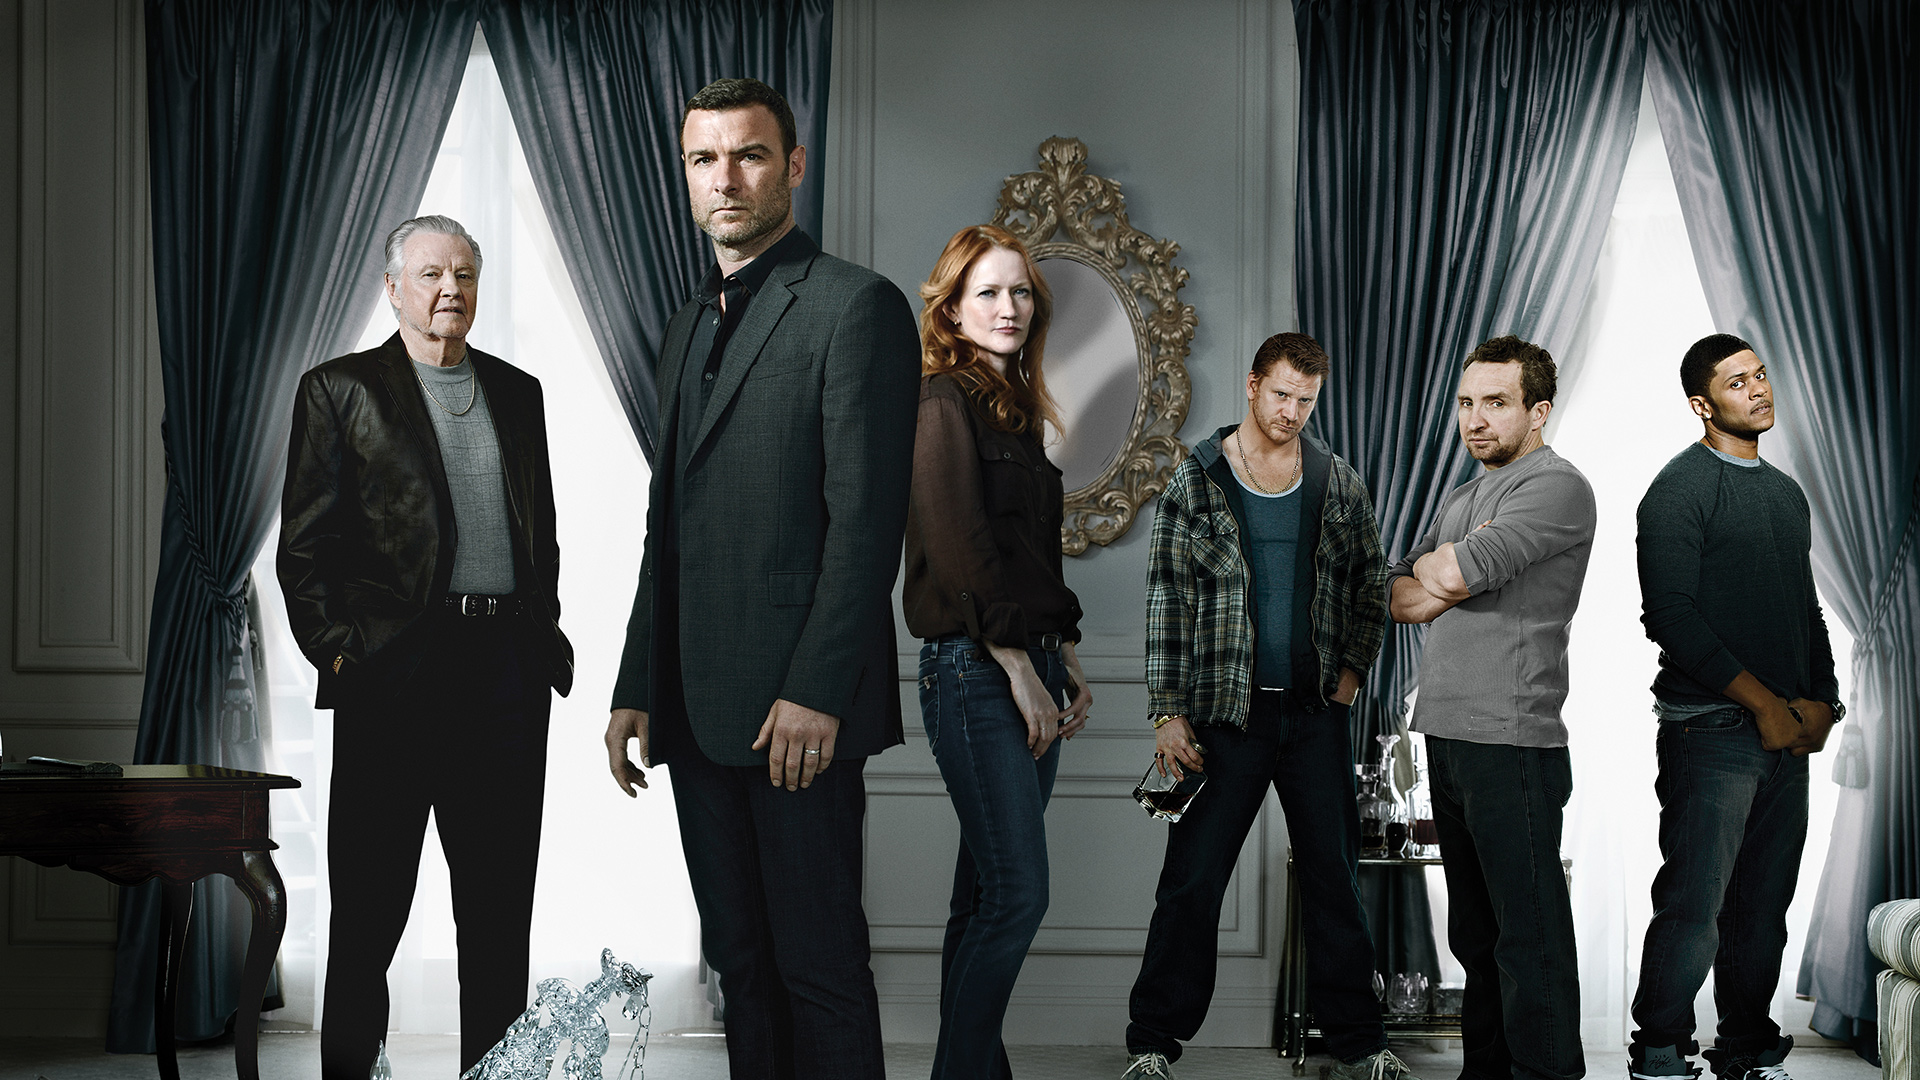 Ray Donovan Wallpaper Pictures Image